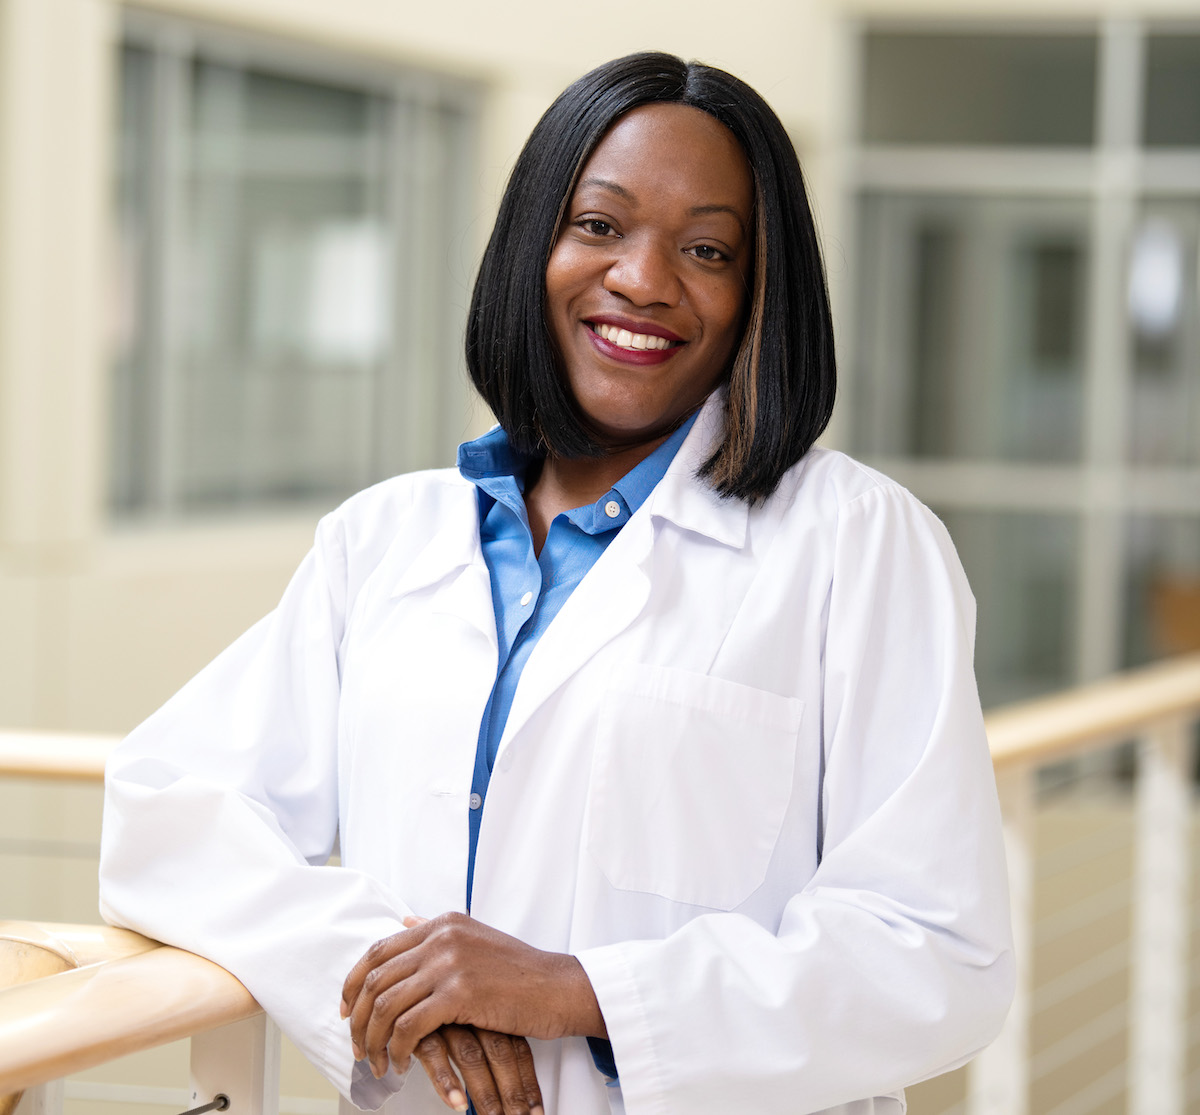 A nursing student in their coat posing for a photo.